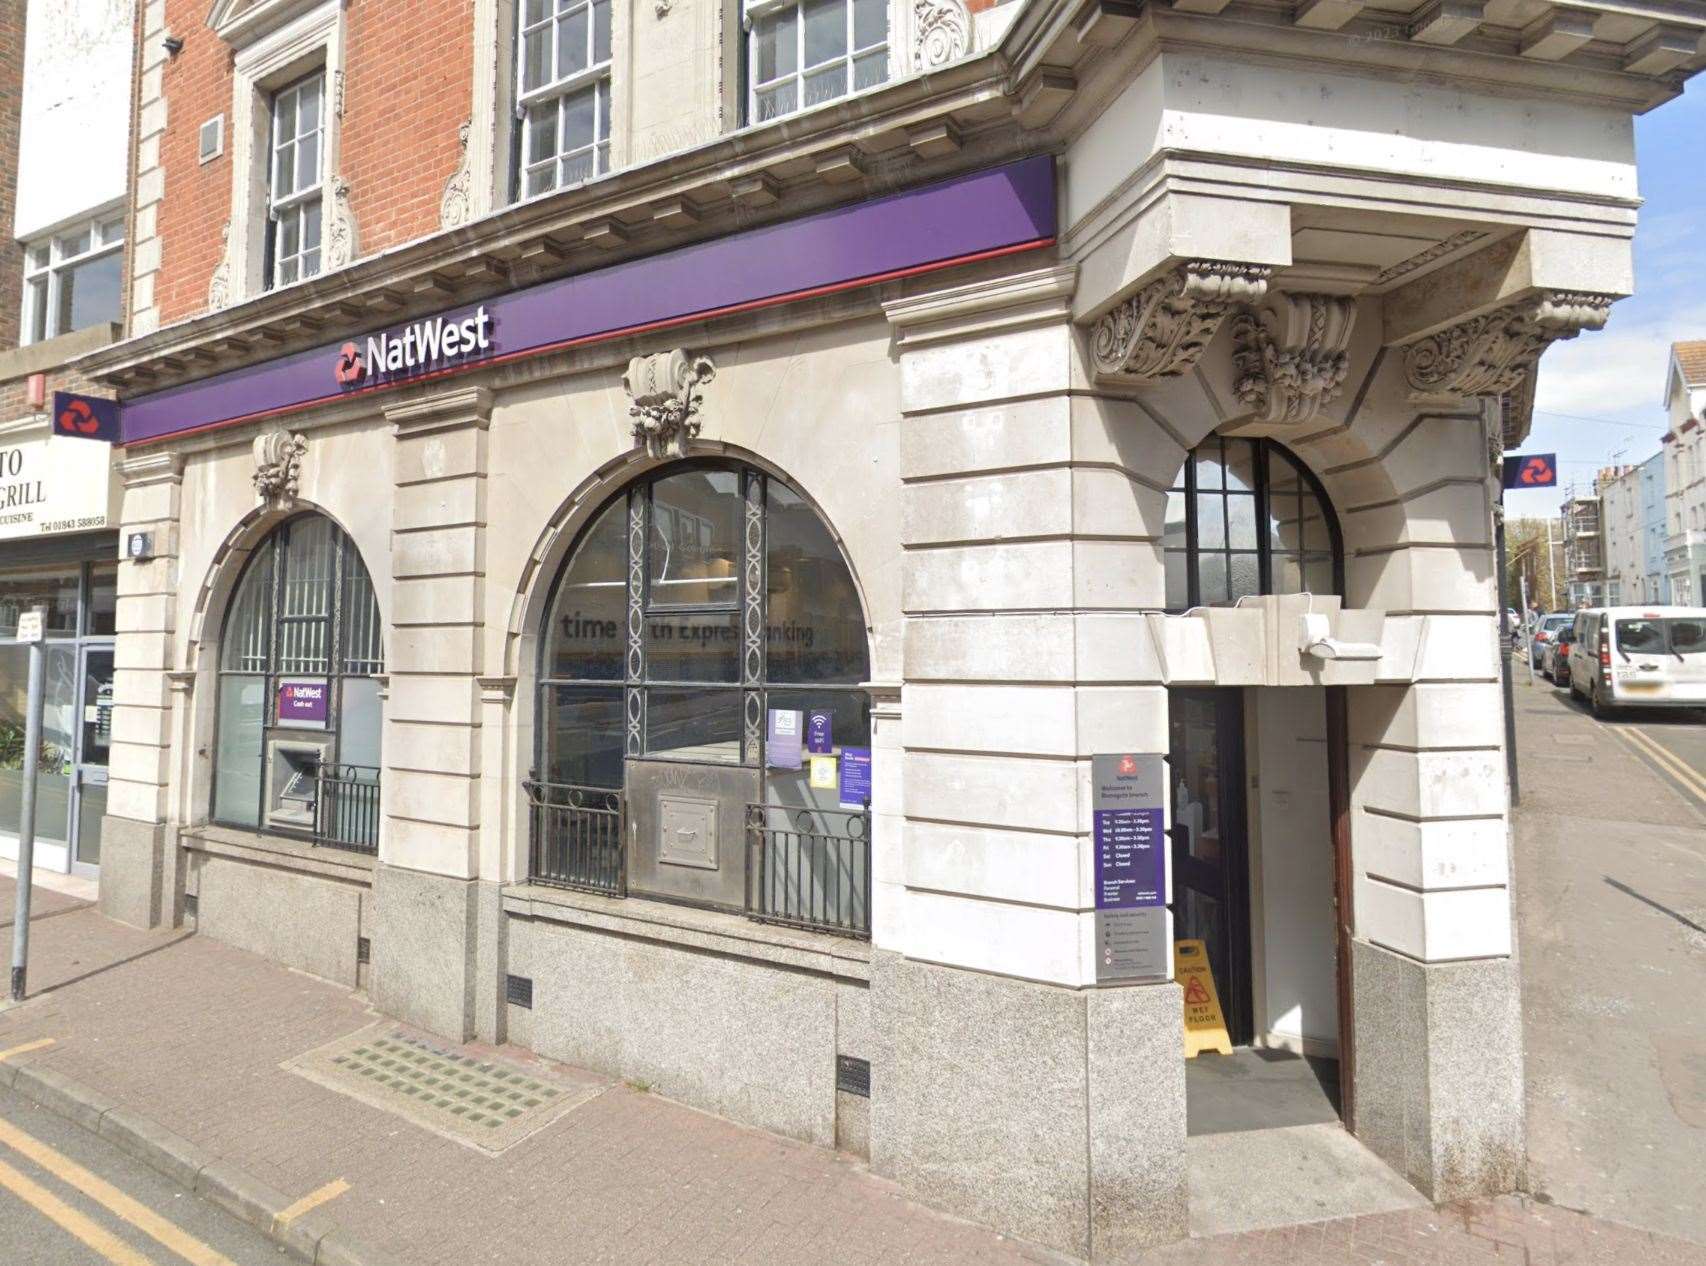 NatWest in Ramsgate High Street is set to close. Picture: Google